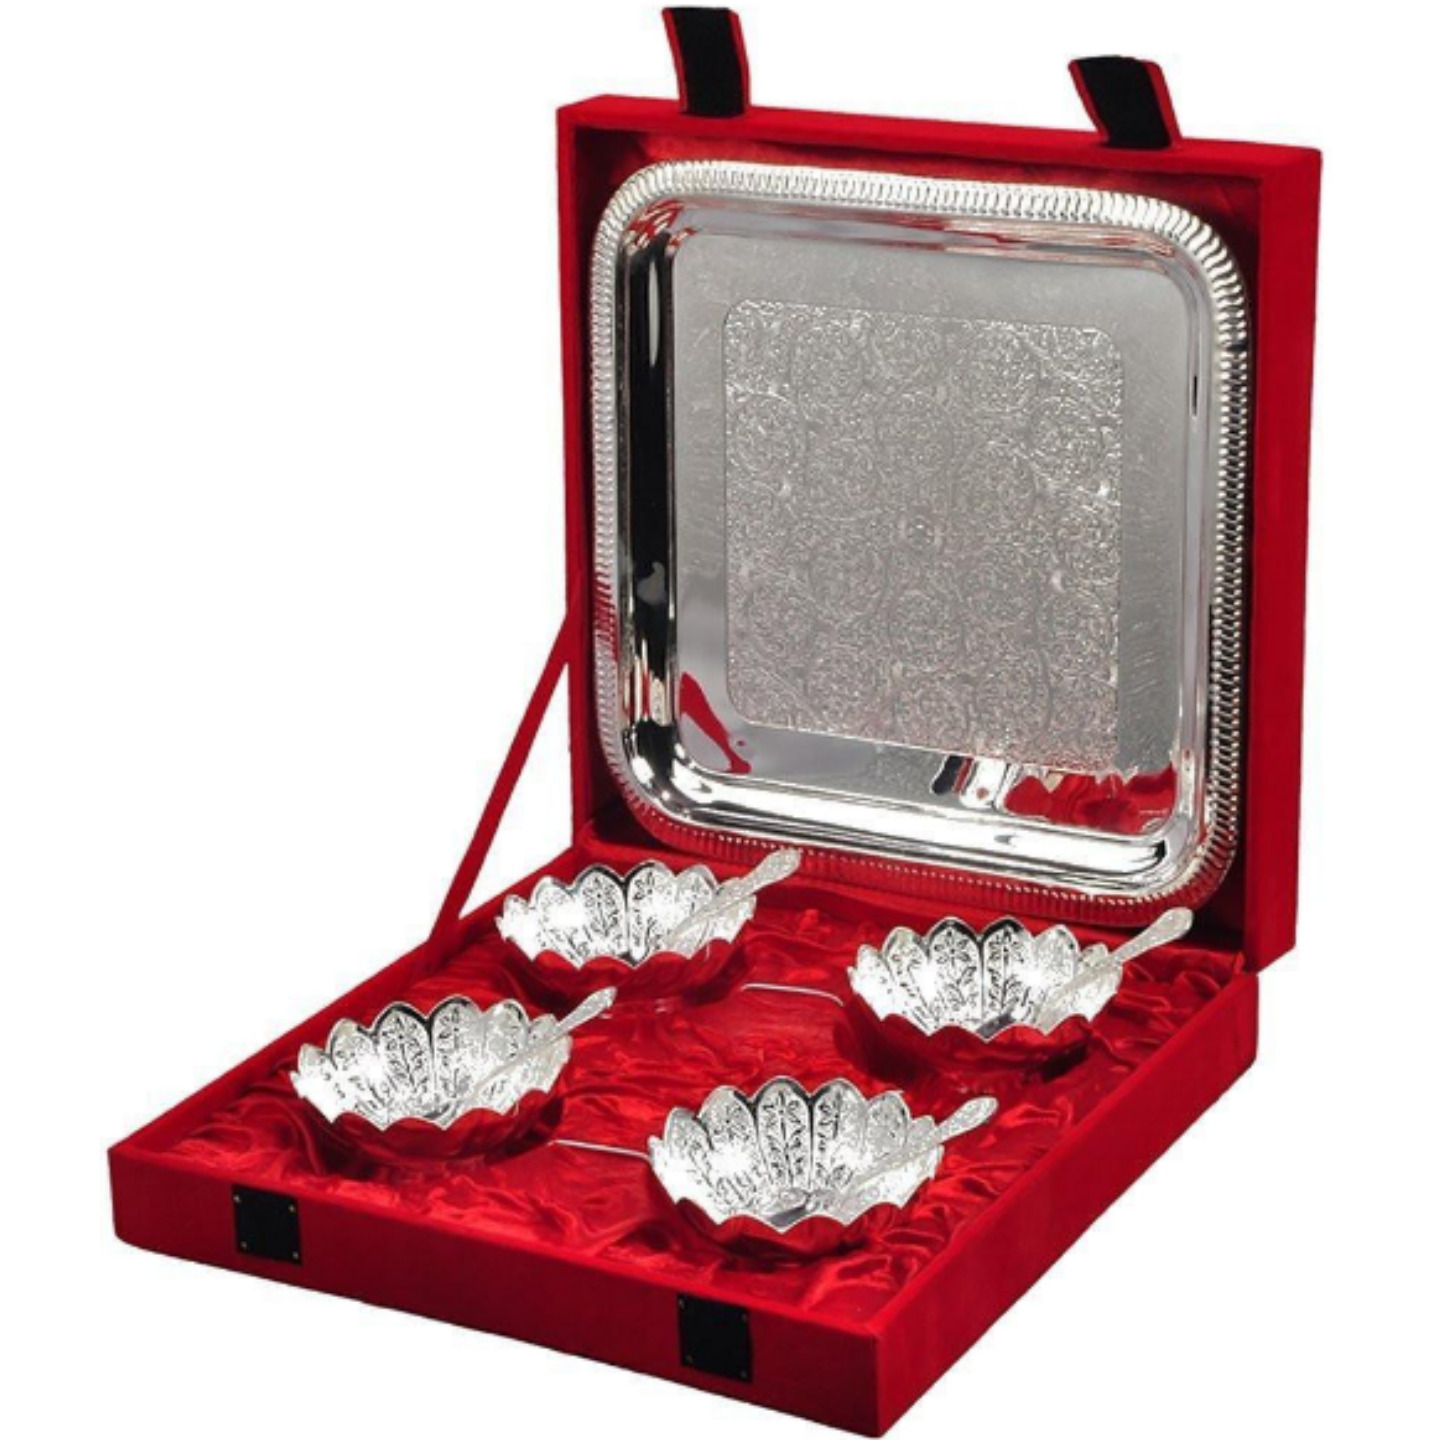 SILVER PLATED SERVING SET WITH 1 TRAY, 4 BOWLS AND 4 SPOON WITH VELVET BOX